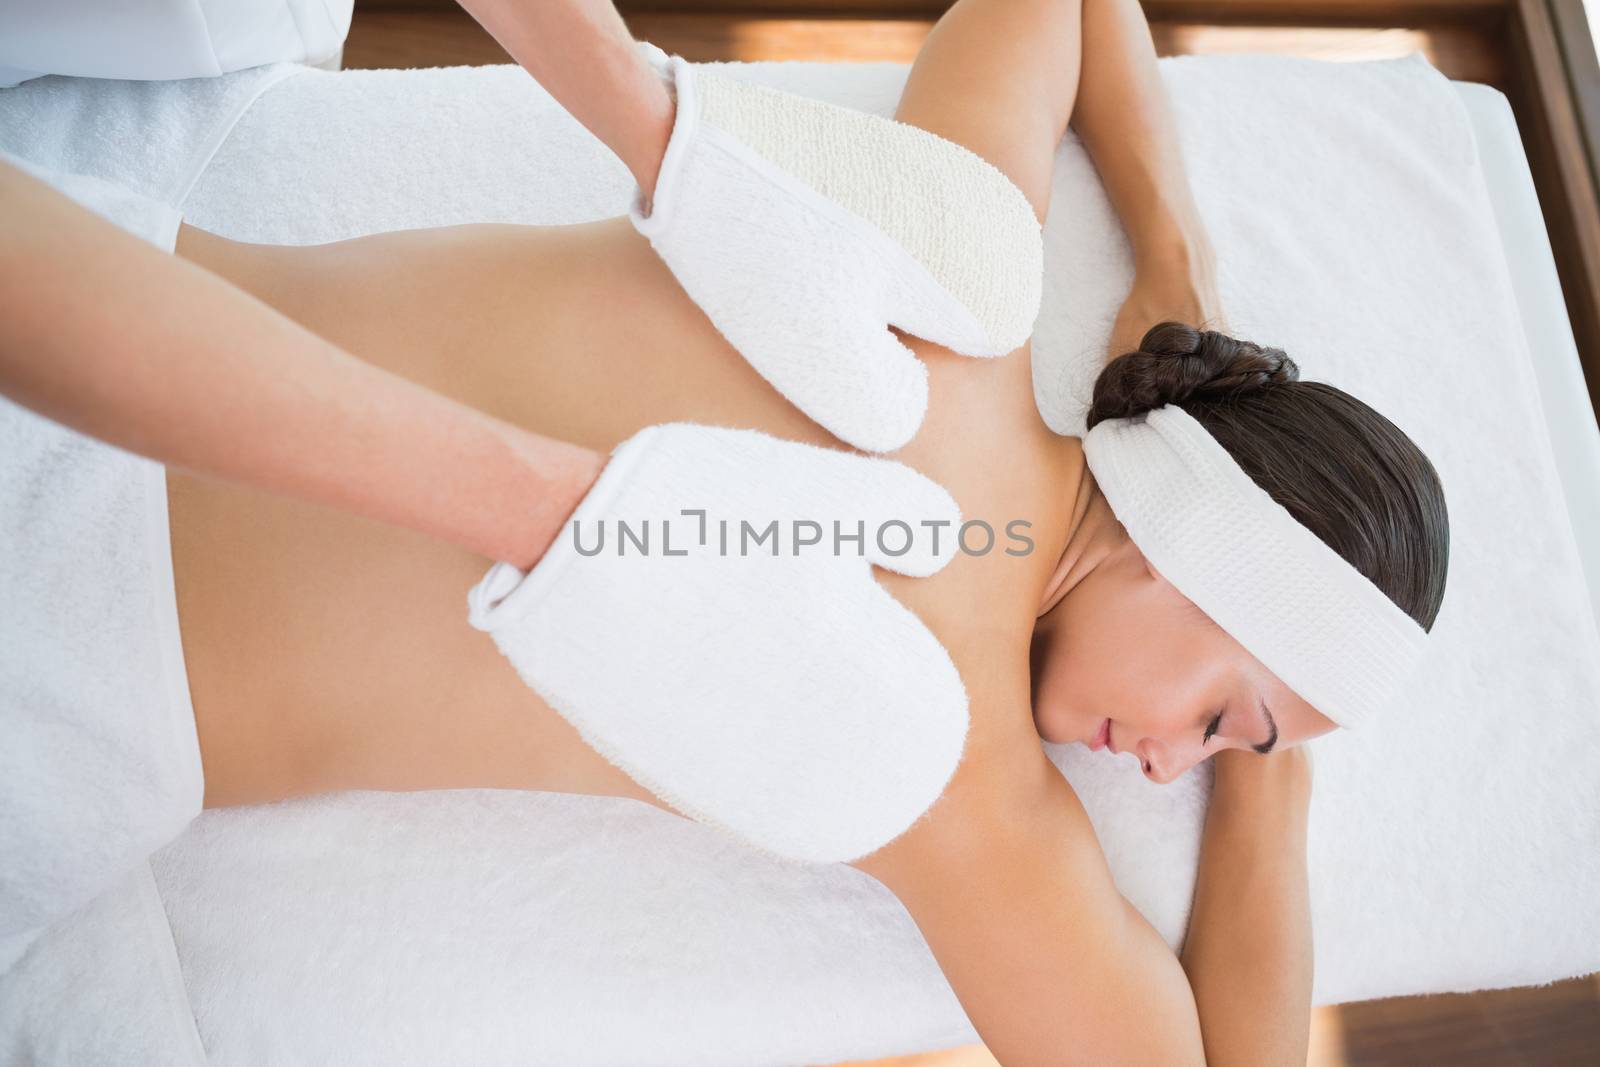 Beauty therapist rubbing womans back with heated mitts in the health spa